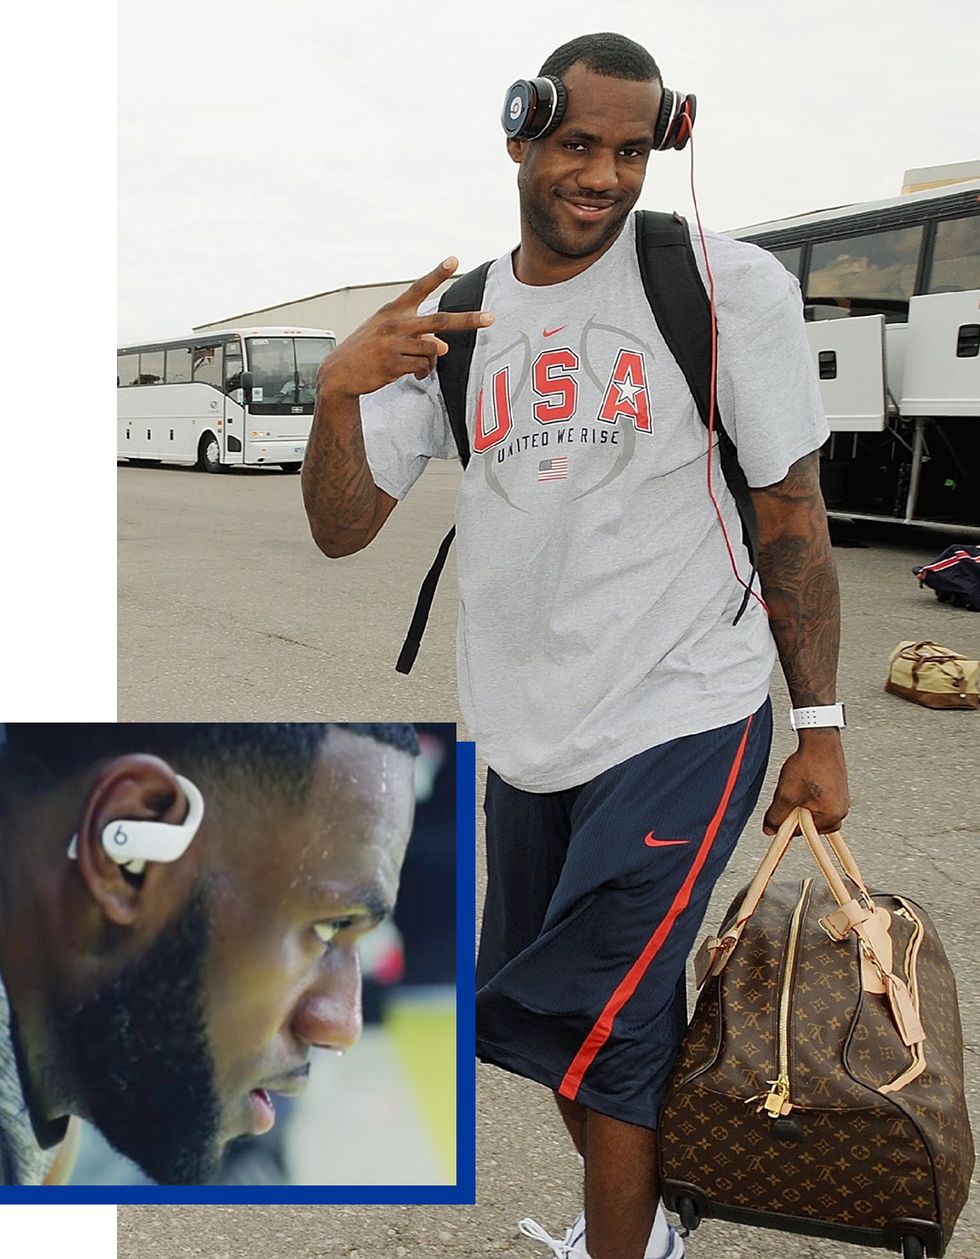 lebron with shoes outfit